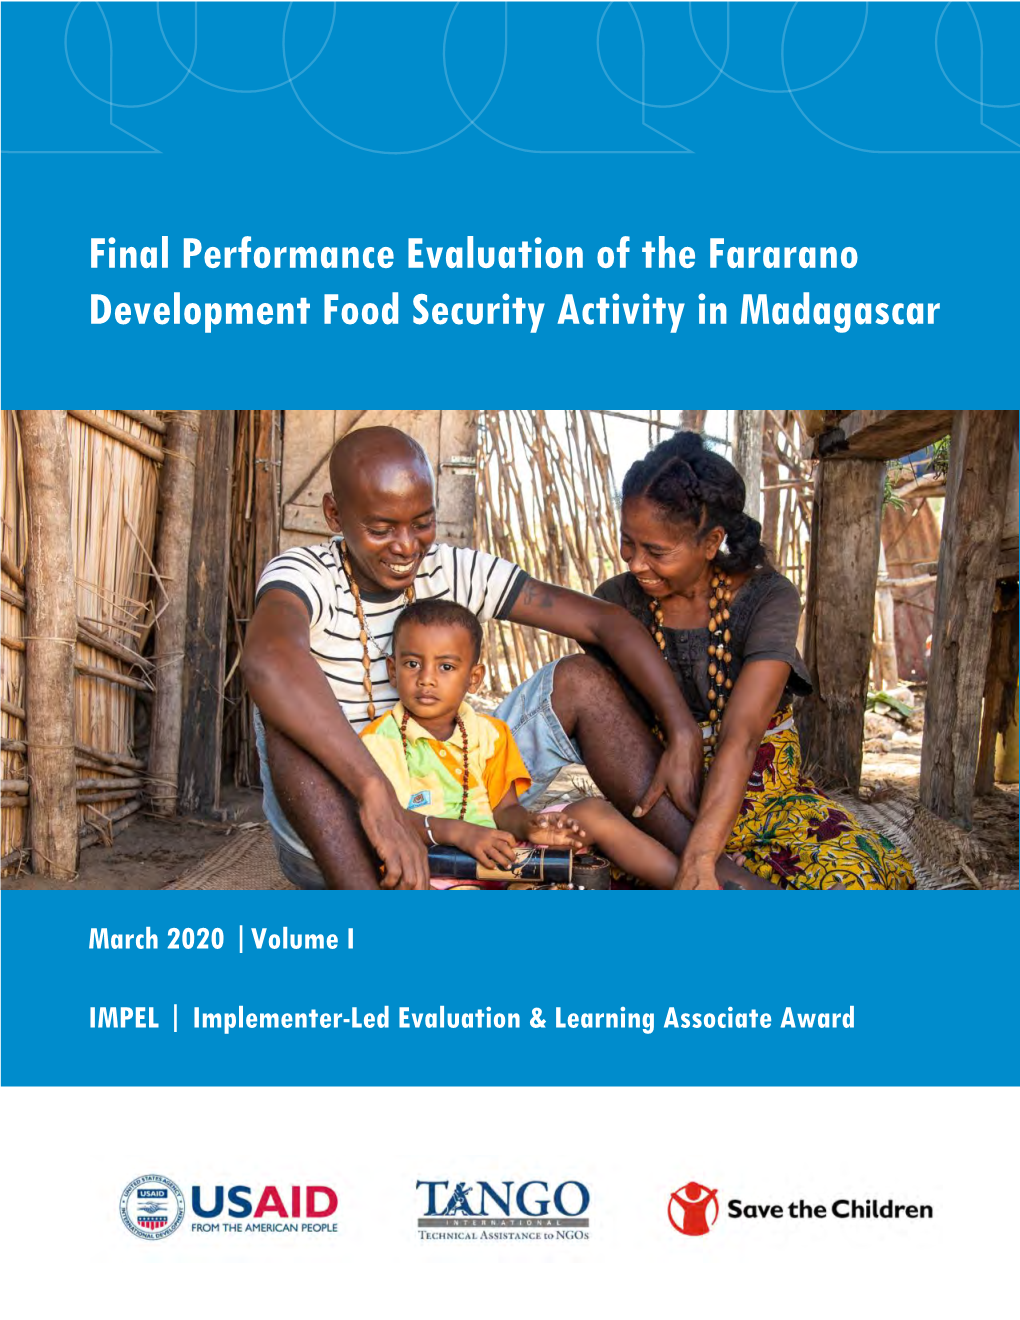 Final Performance Evaluation of the Fararano Development Food Security Activity in Madagascar